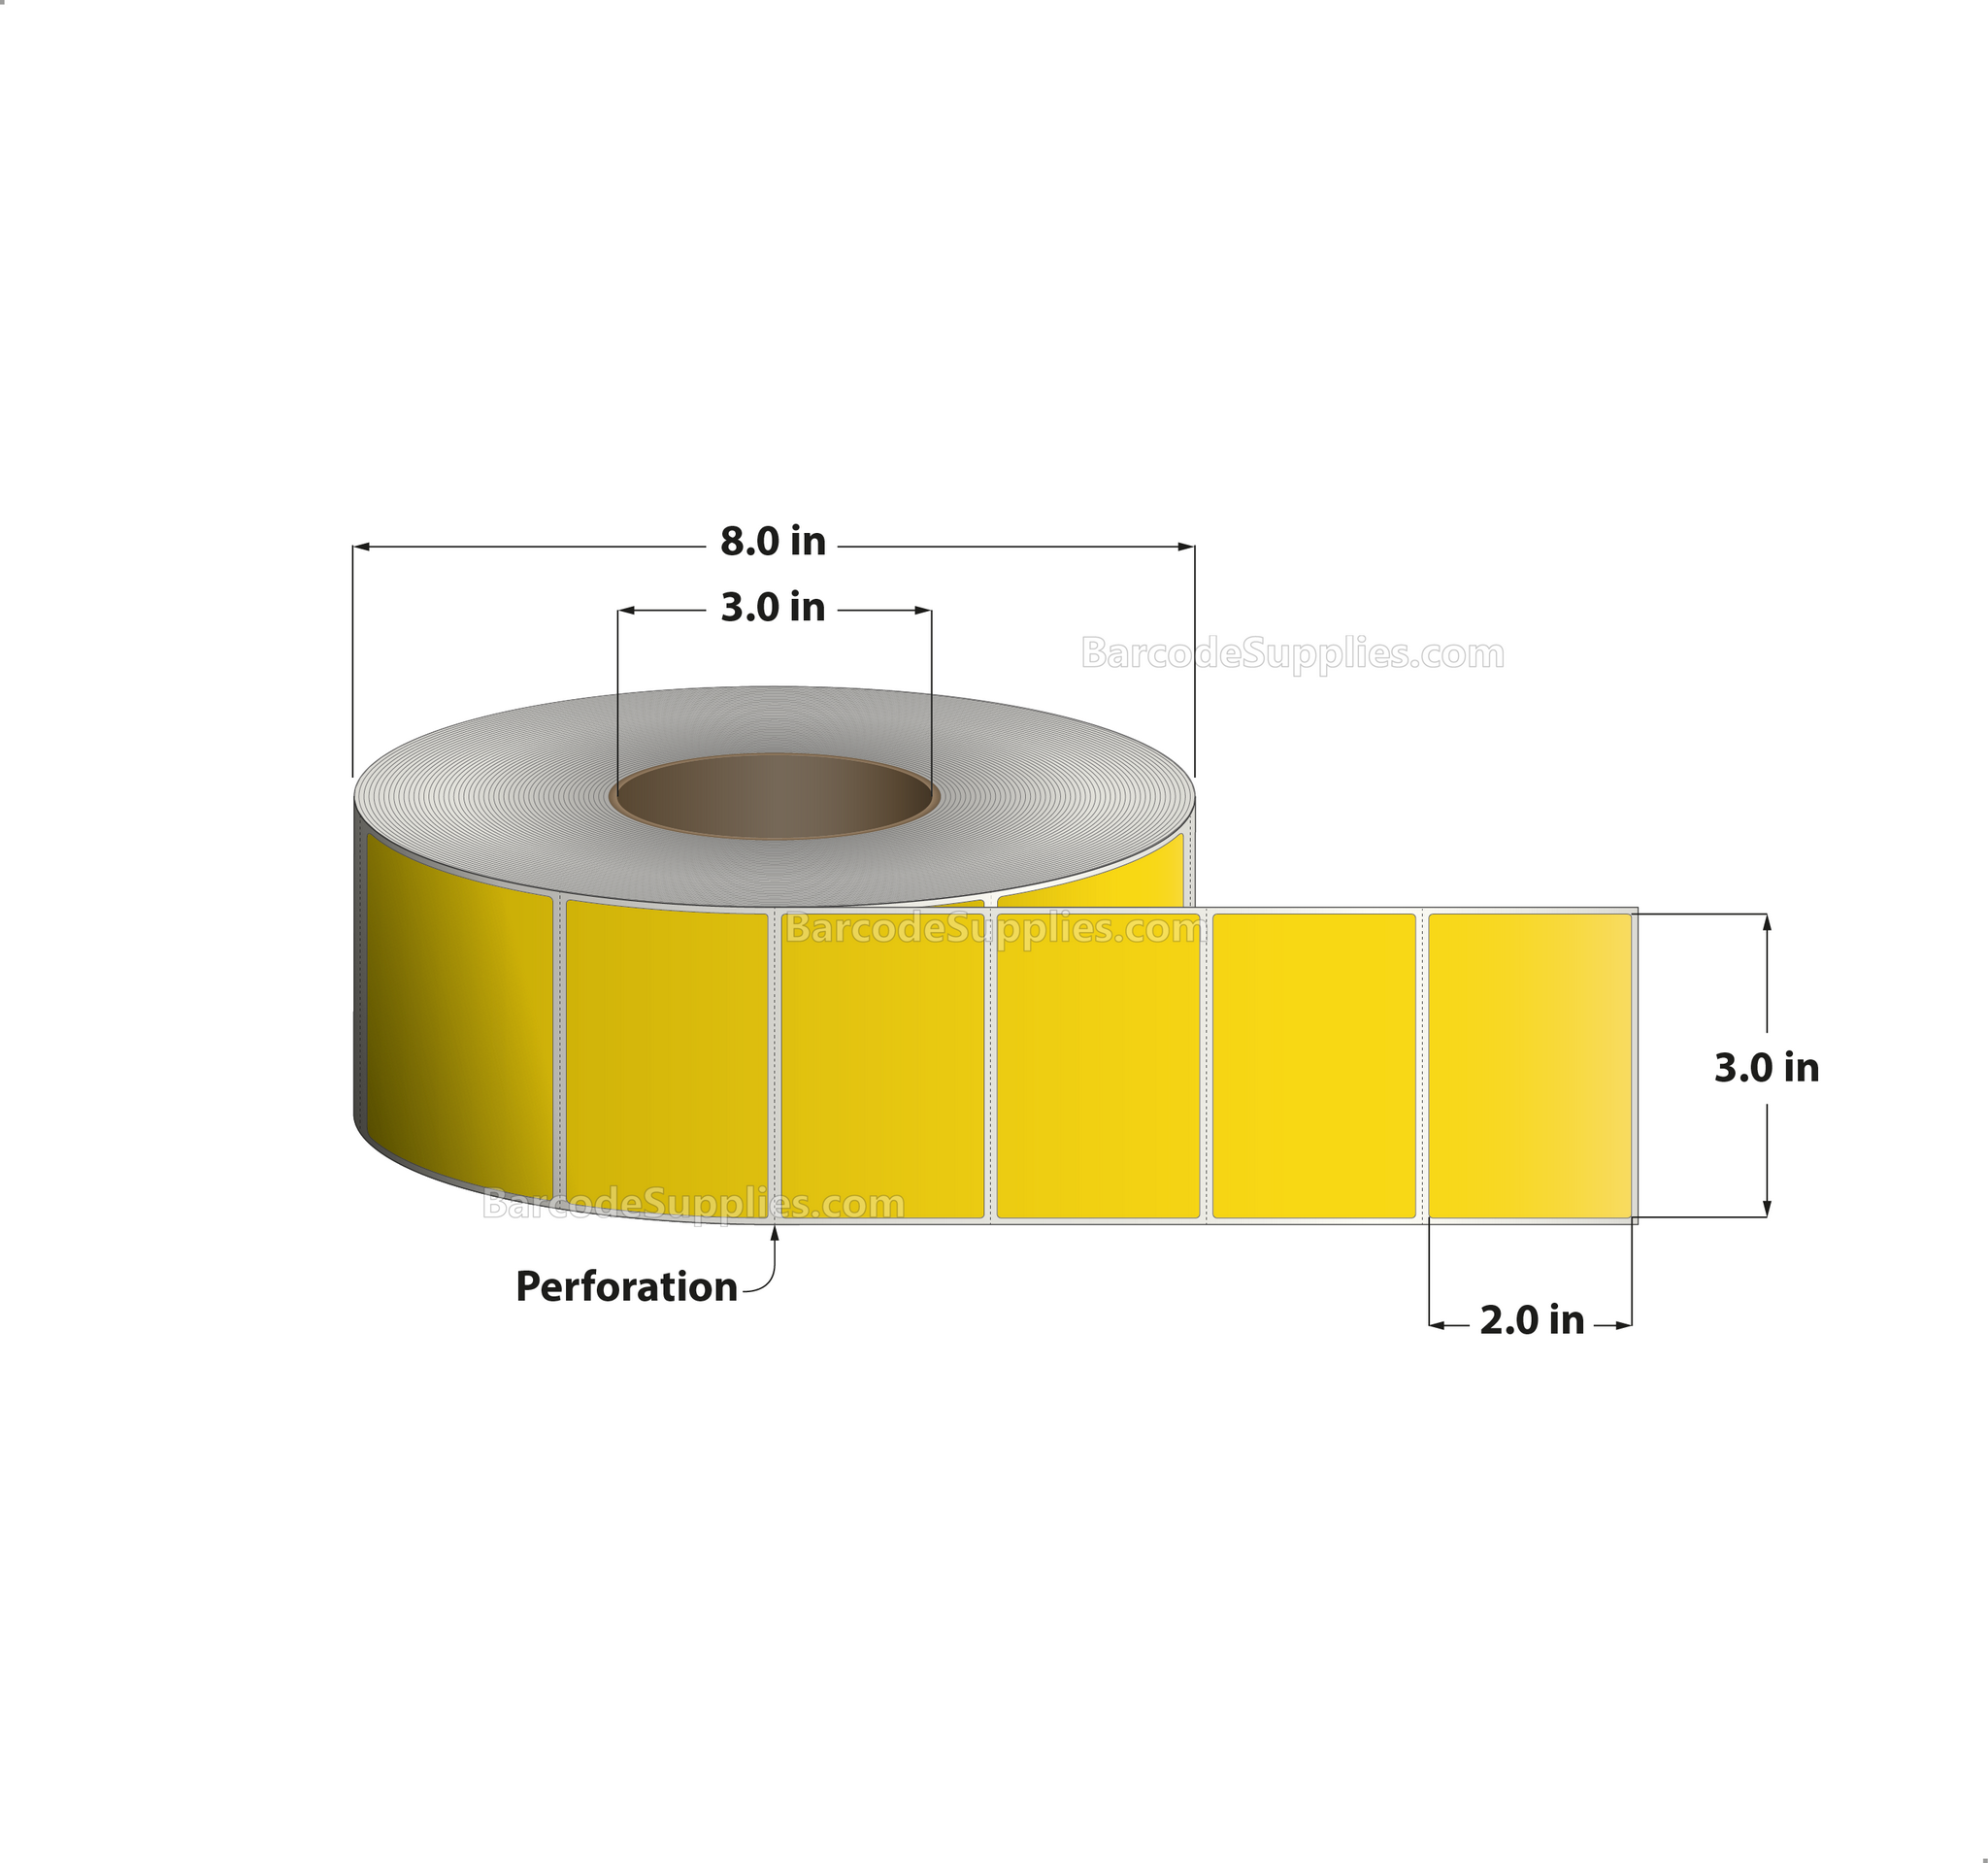 3 x 2 Thermal Transfer Pantone Yellow Labels With Permanent Adhesive - Perforated - 2900 Labels Per Roll - Carton Of 8 Rolls - 23200 Labels Total - MPN: RFC-3-2-2900-YL